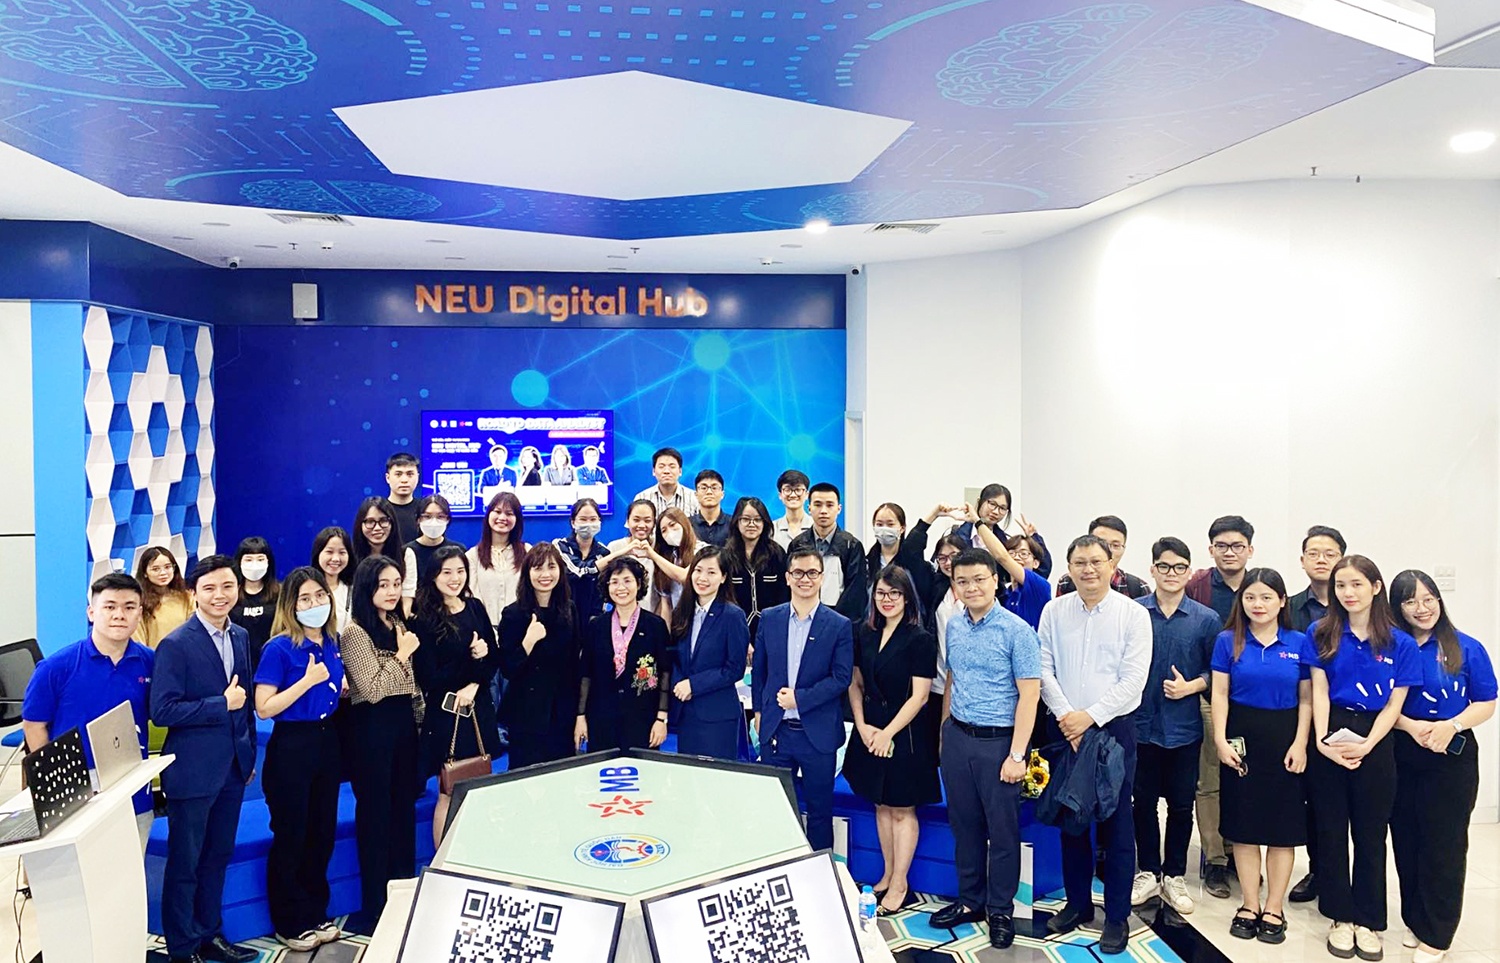 MB nurtures young talents and embraces digital innovation